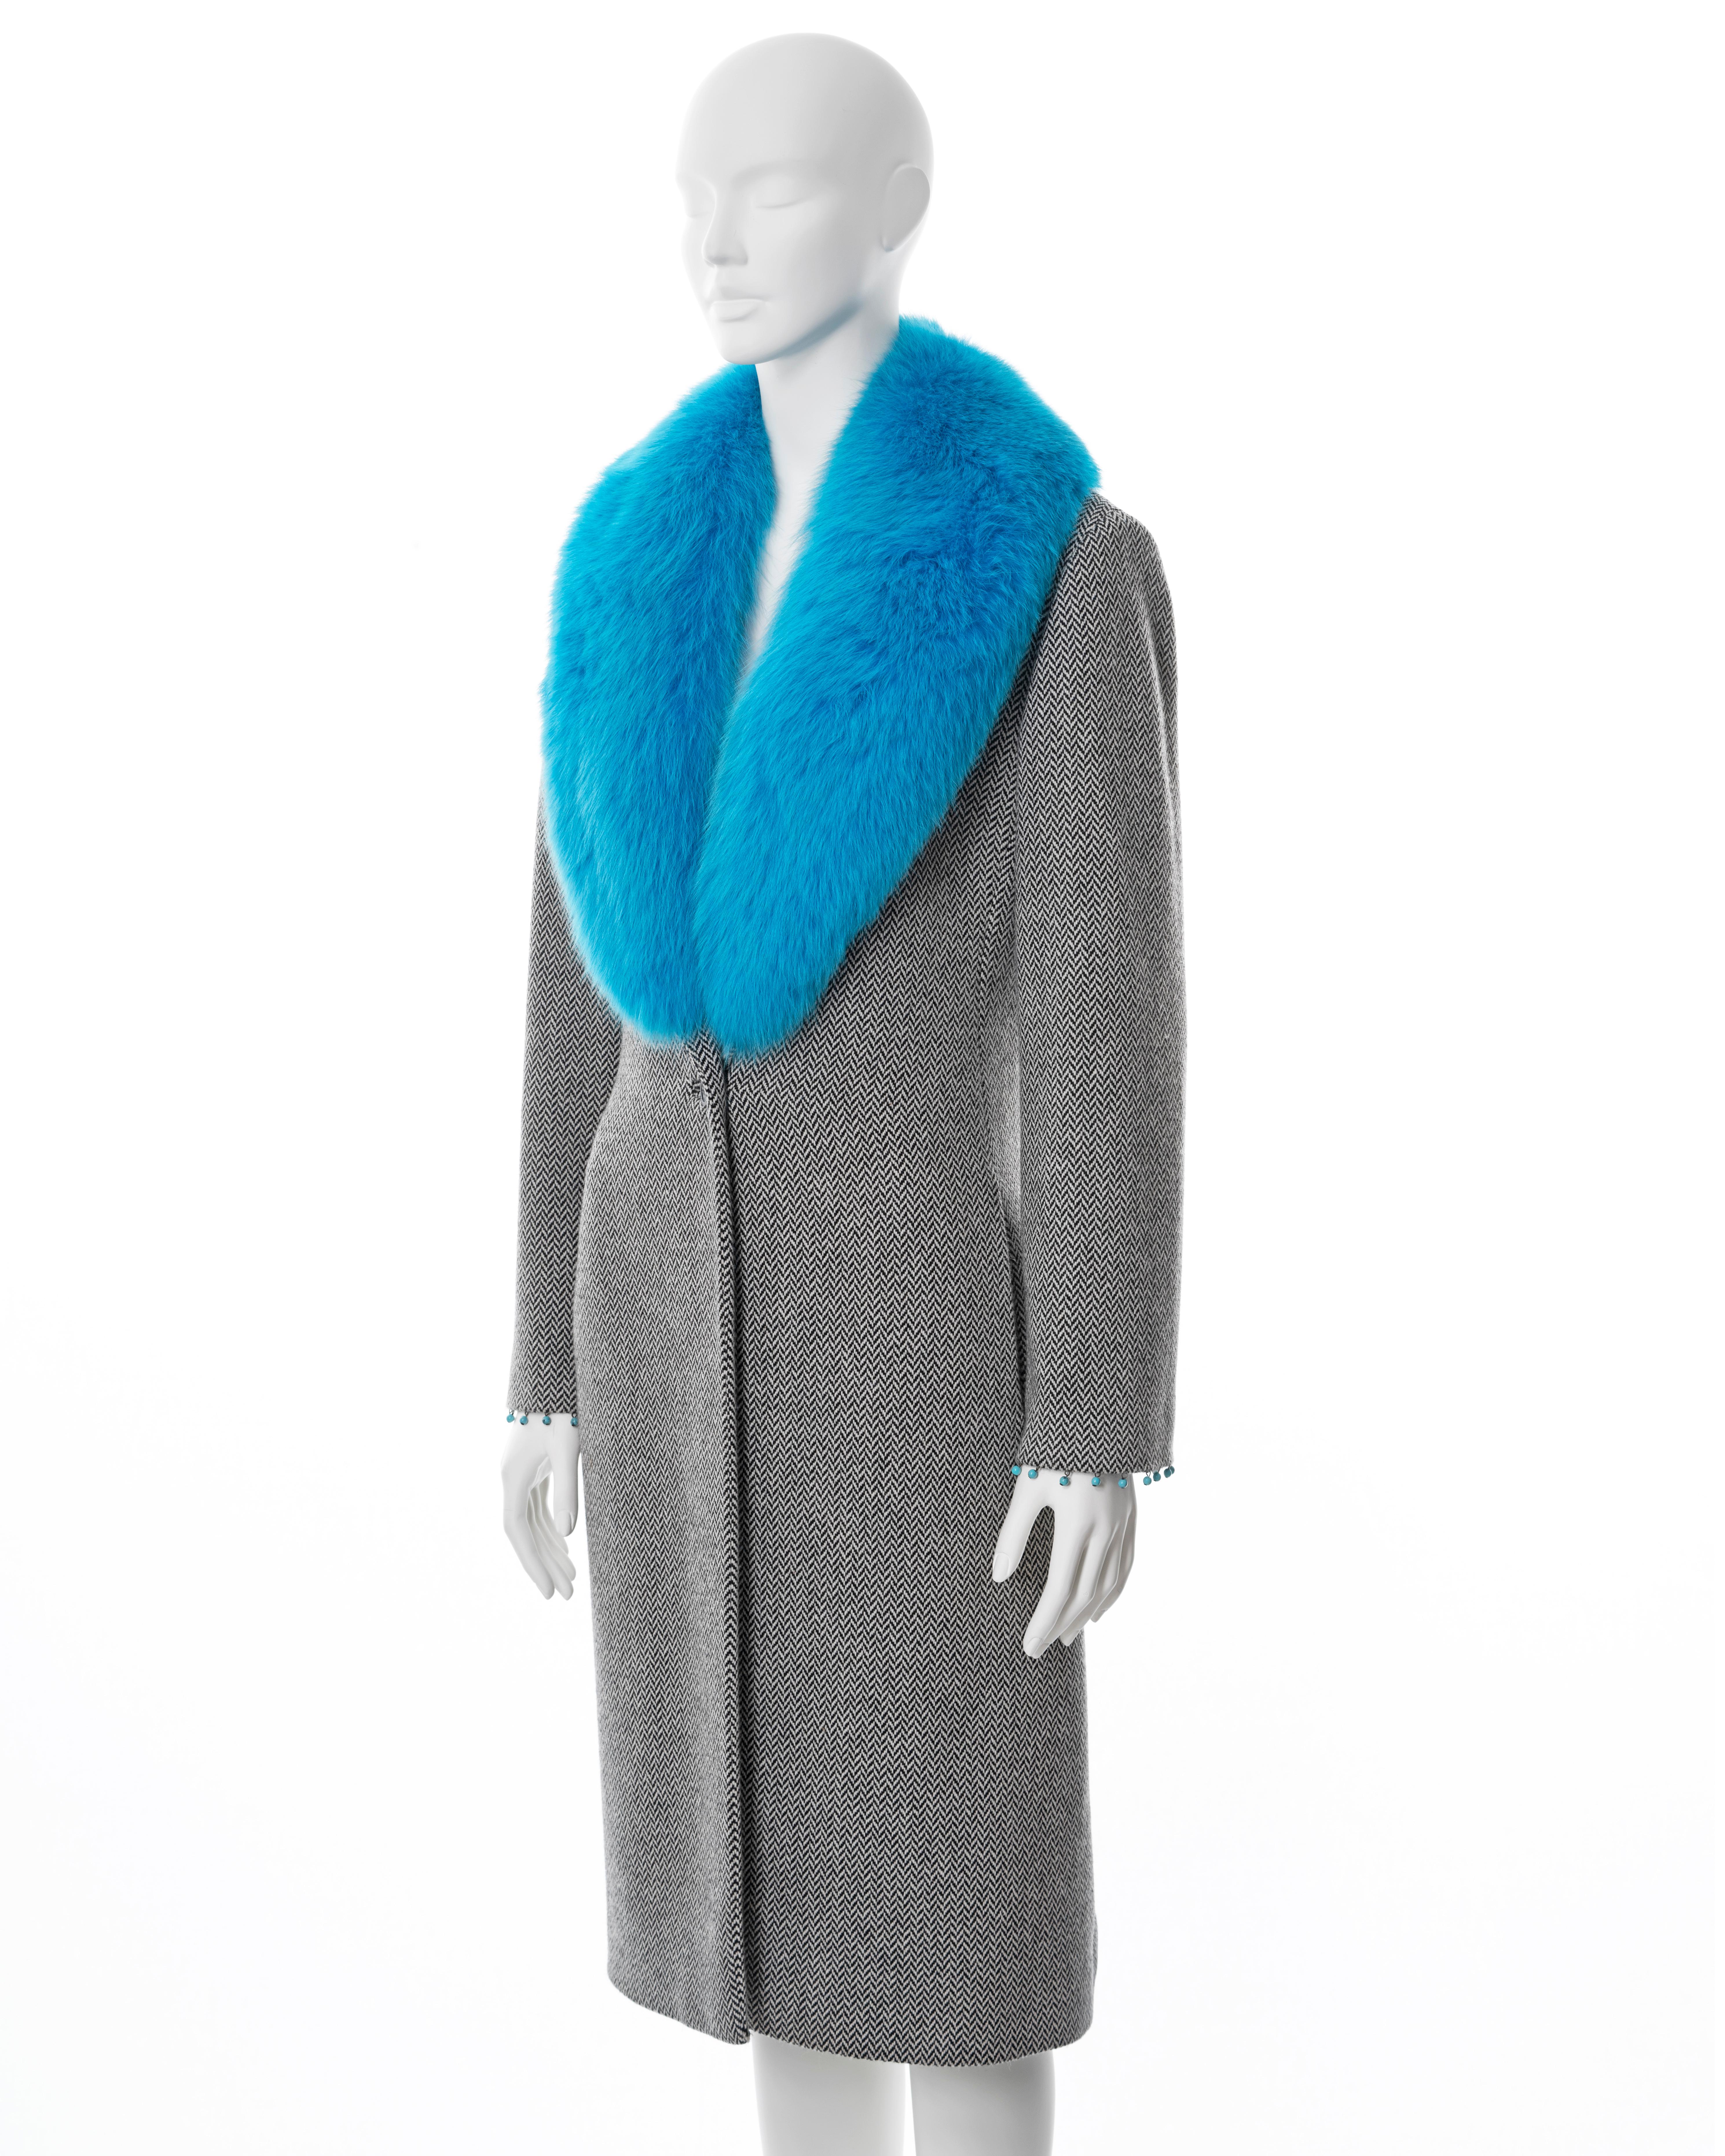 Gianni Versace herringbone tweed coat with blue fox fur collar, fw 1999 In Excellent Condition For Sale In London, GB